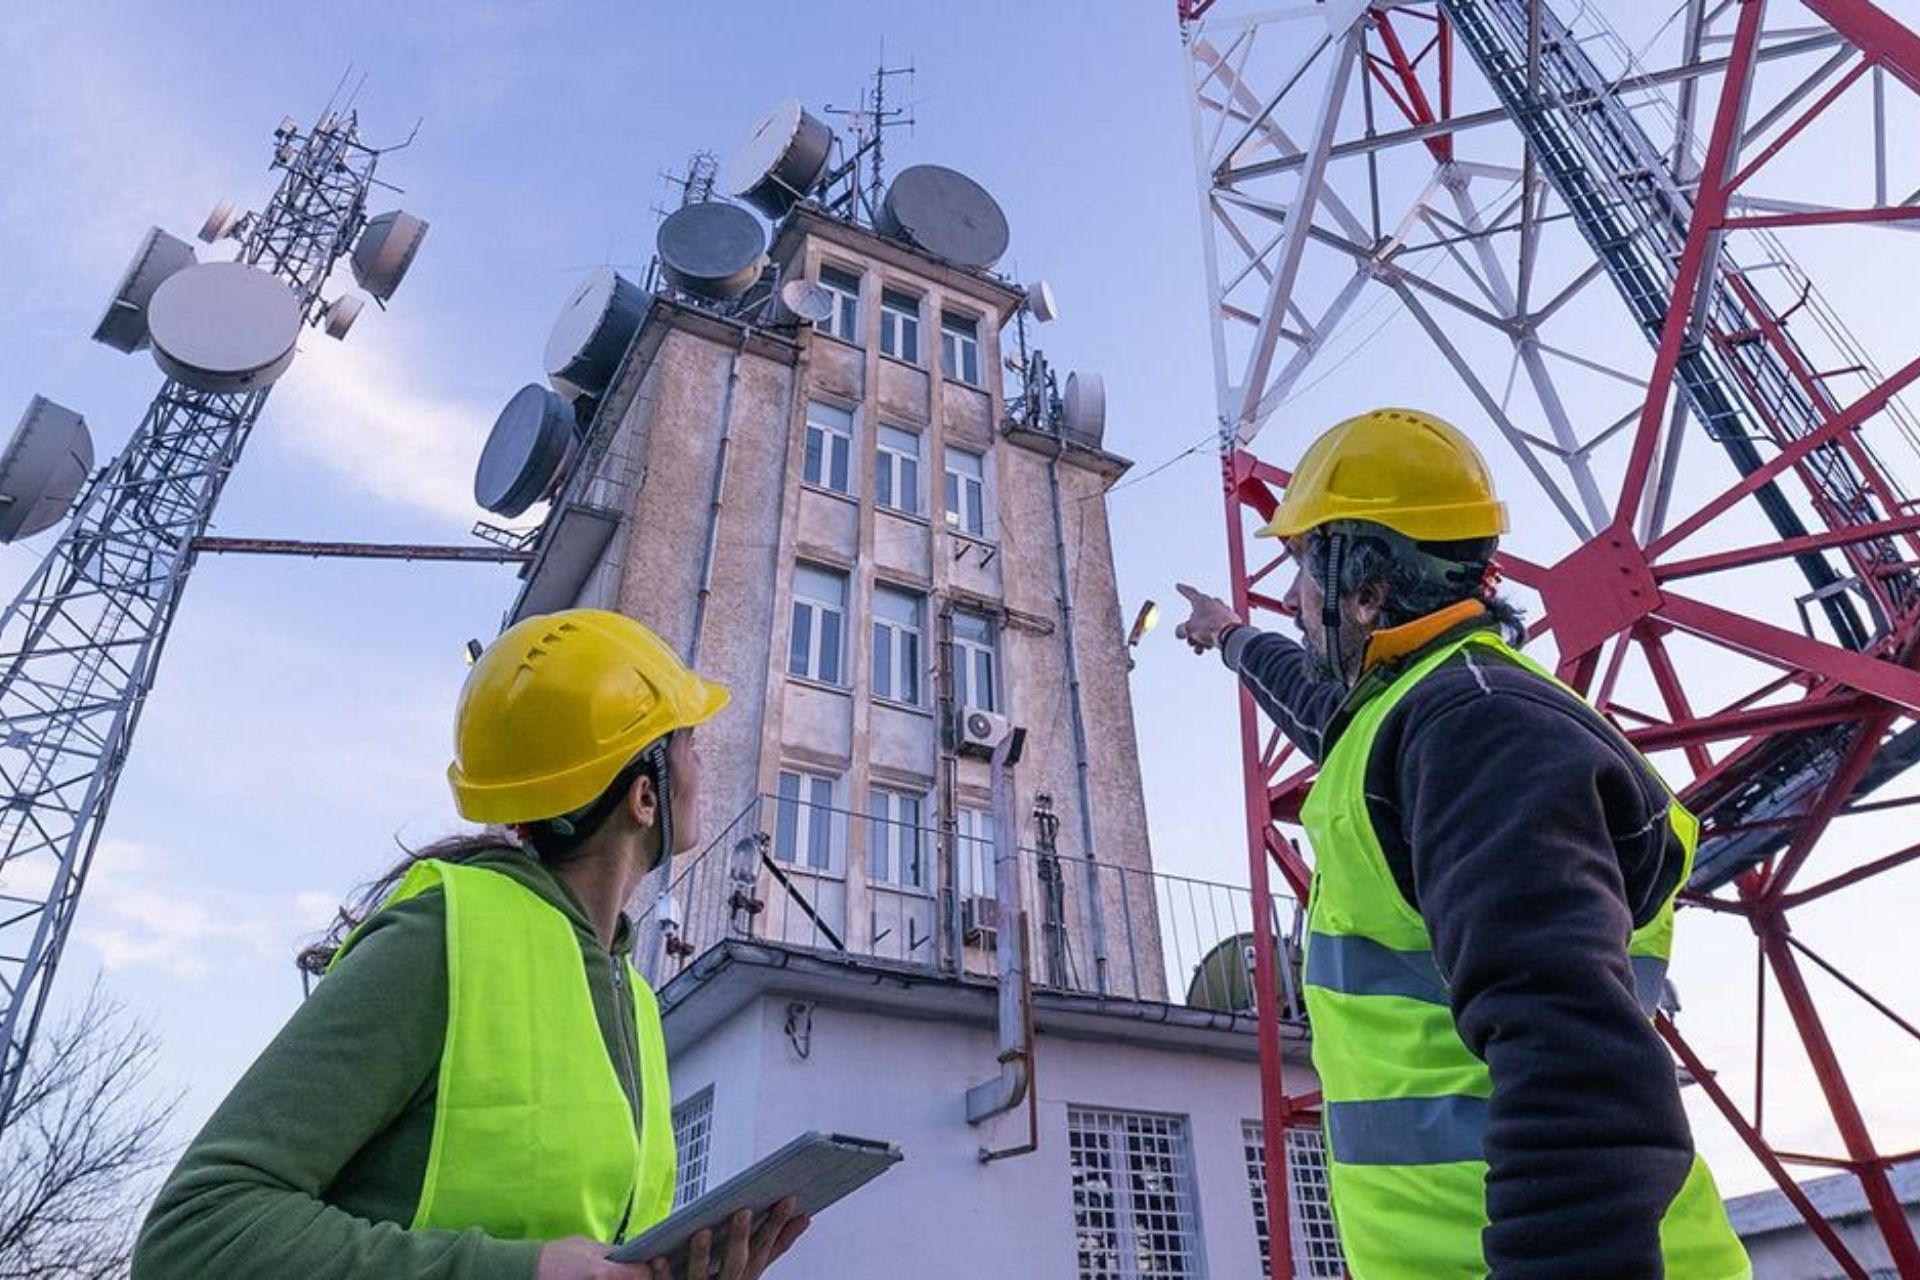 Workers in hard hats evaluate broadband tower